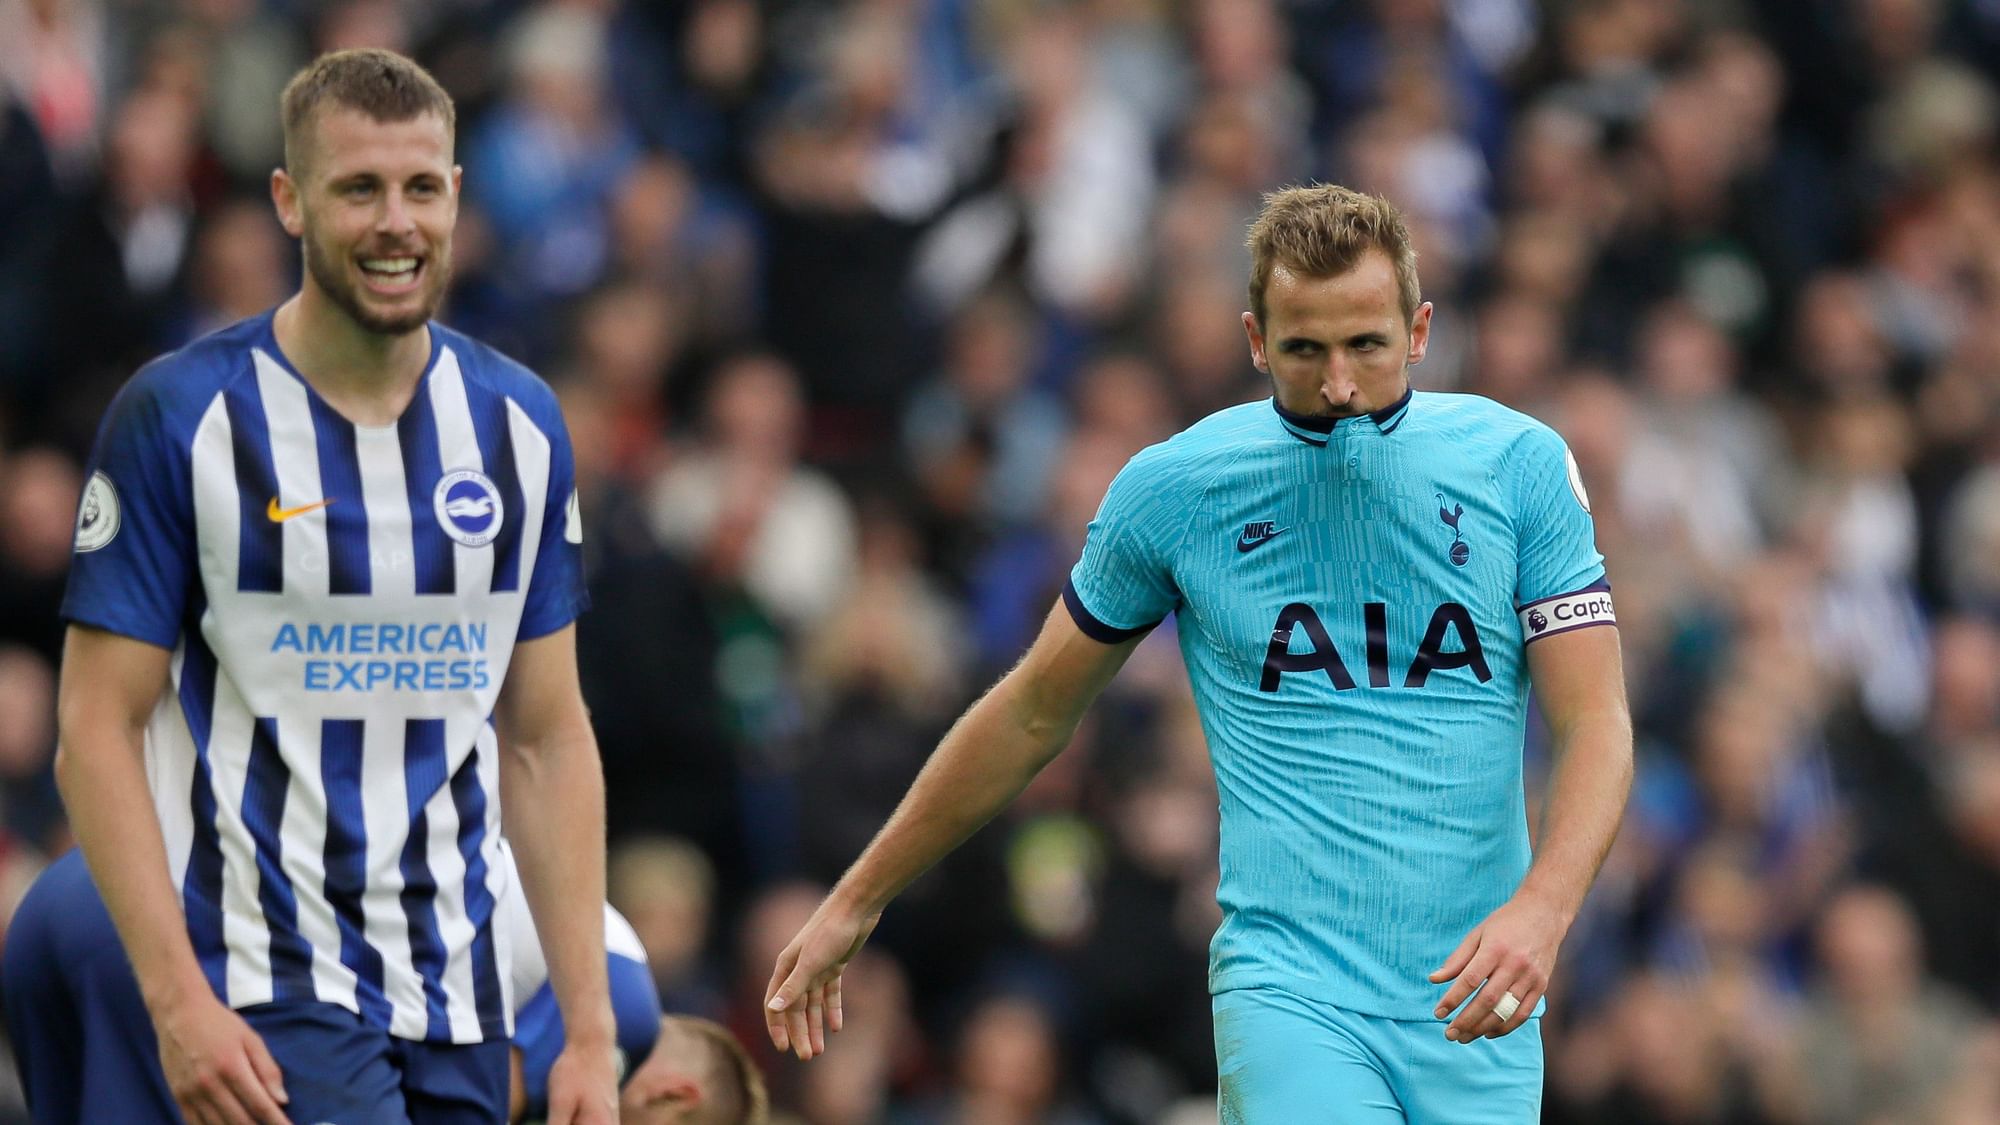 Tottenham followed up its midweek thrashing at Bayern Munich’s hands by plunging to a 3-0 loss at Brighton in the Premier League.